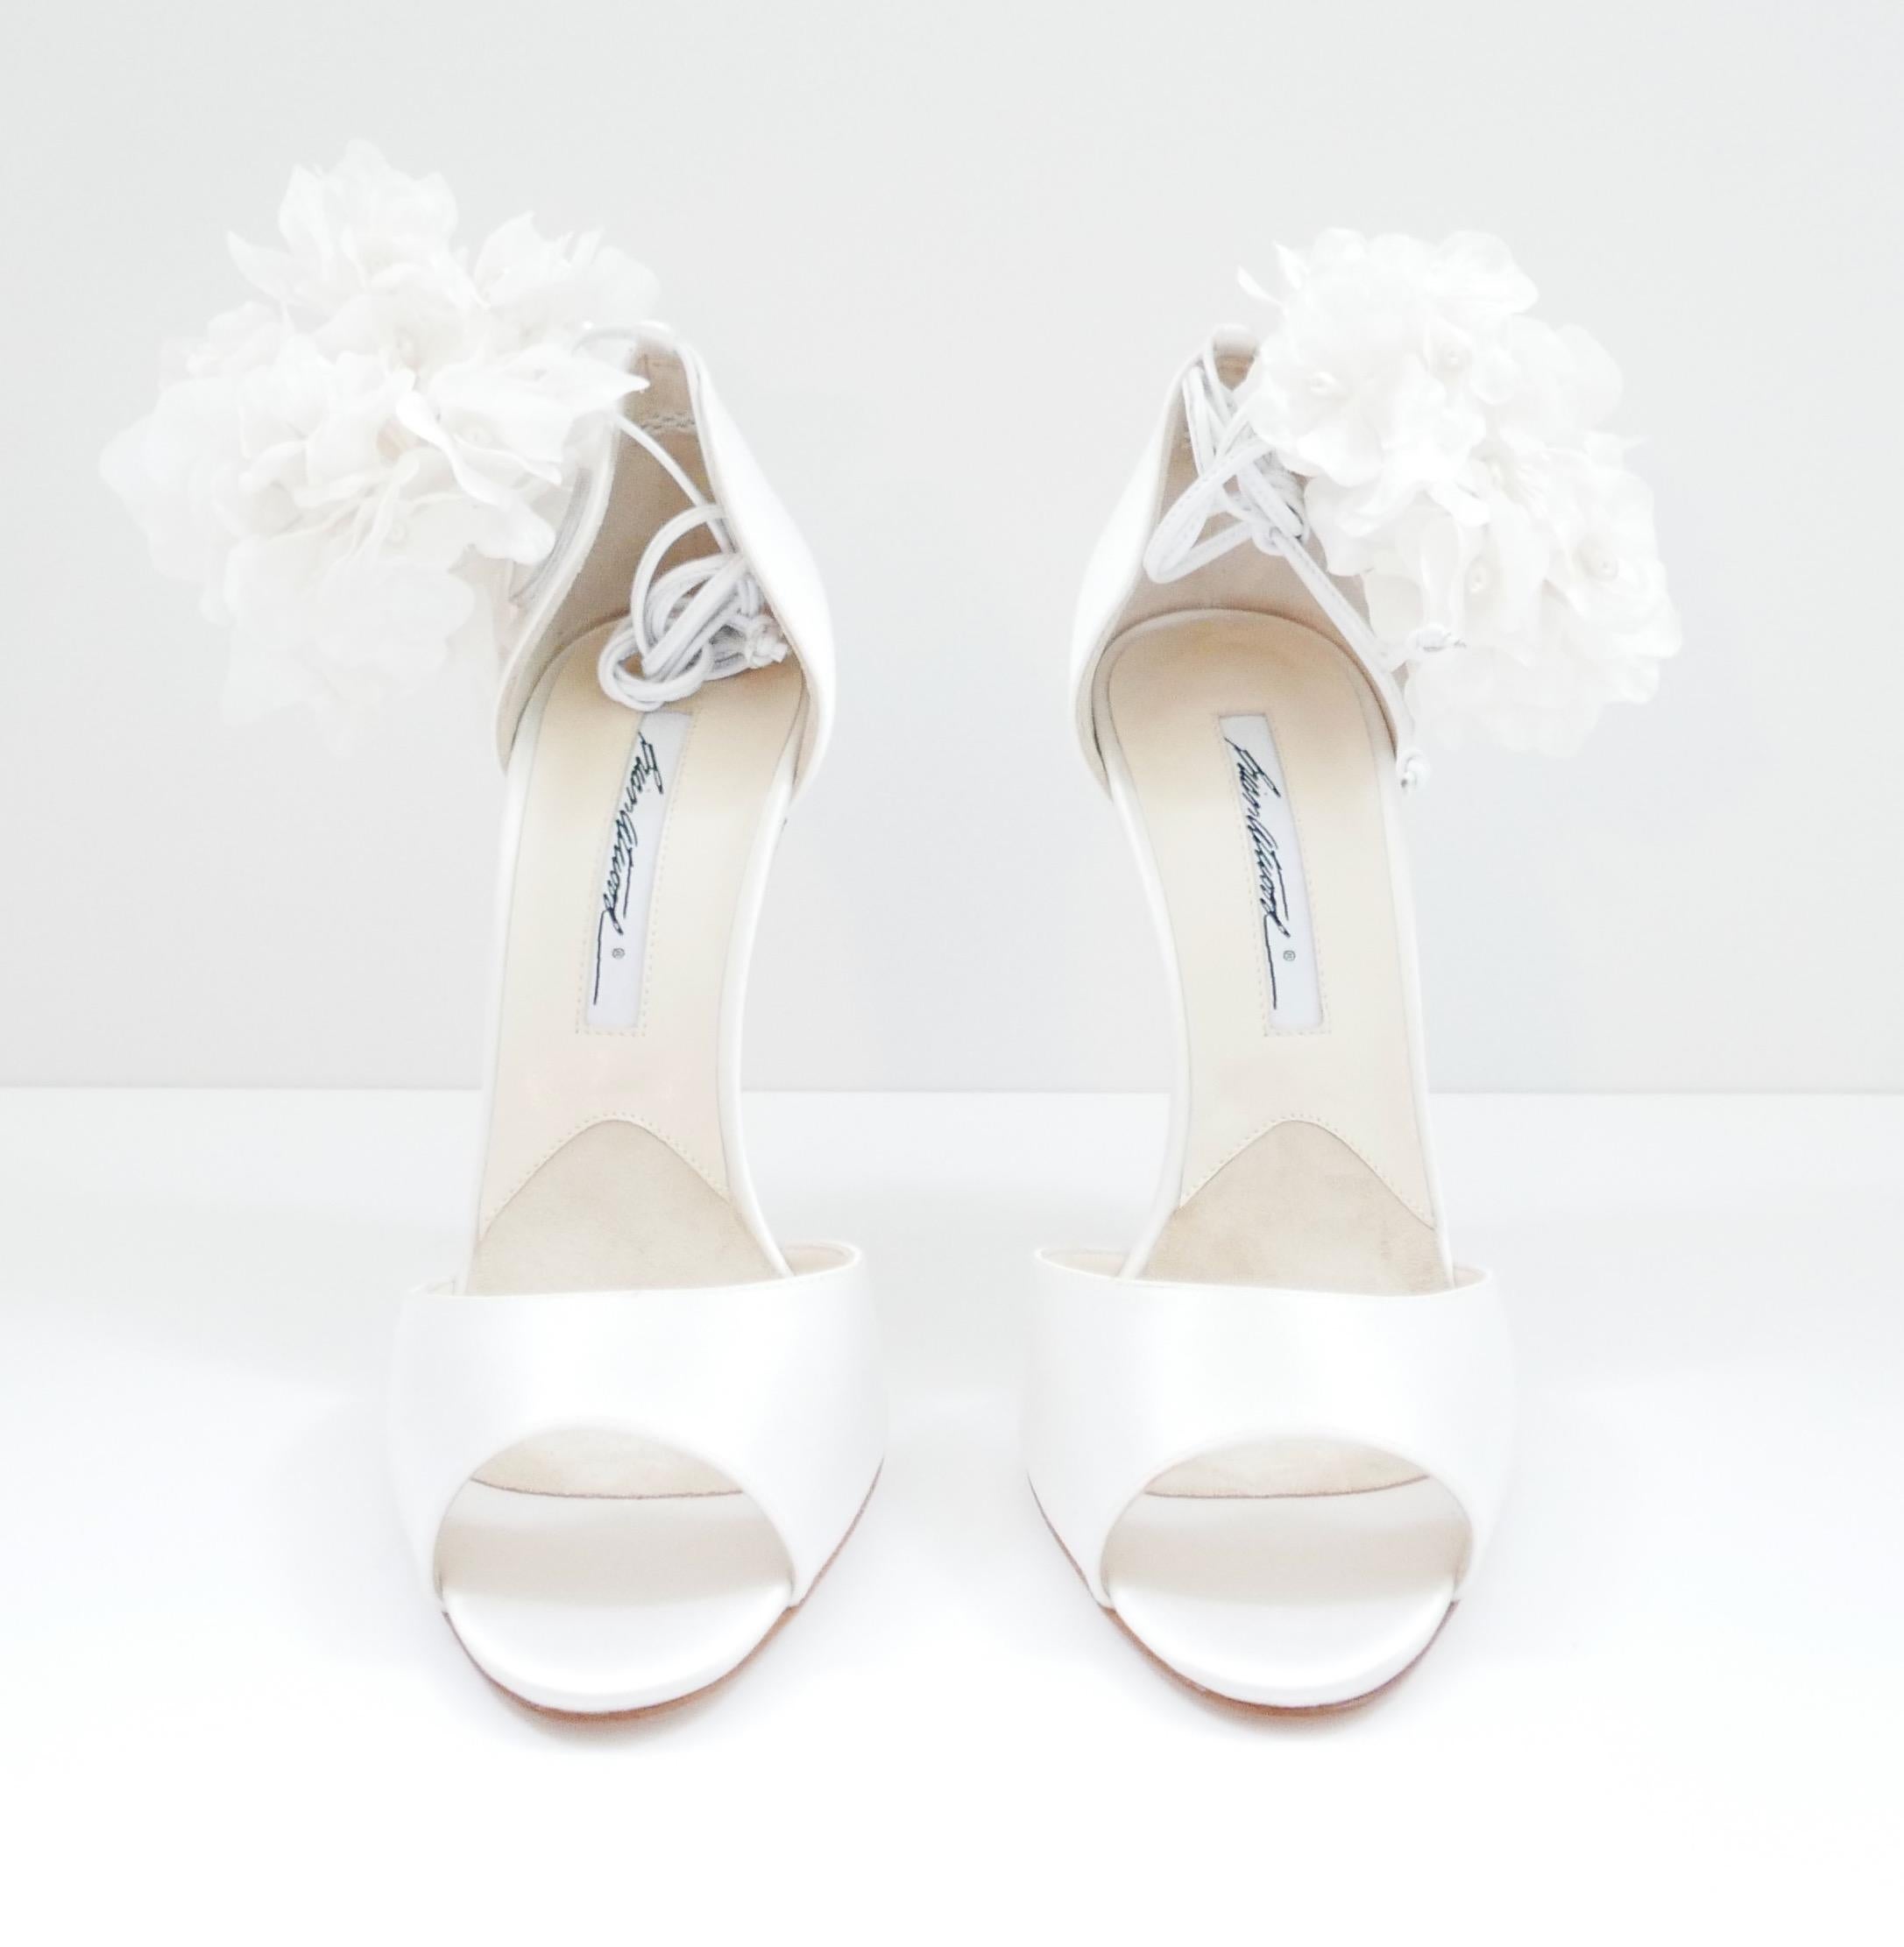 Absolutely exquisite wedding from Brian Atwood’s limited edition bridal collection. bought for £1200 and are unworn with box and spare heel tips (Box has a few marks). Superbly crafted from thick cream silk satin, they have stunning faux pearl